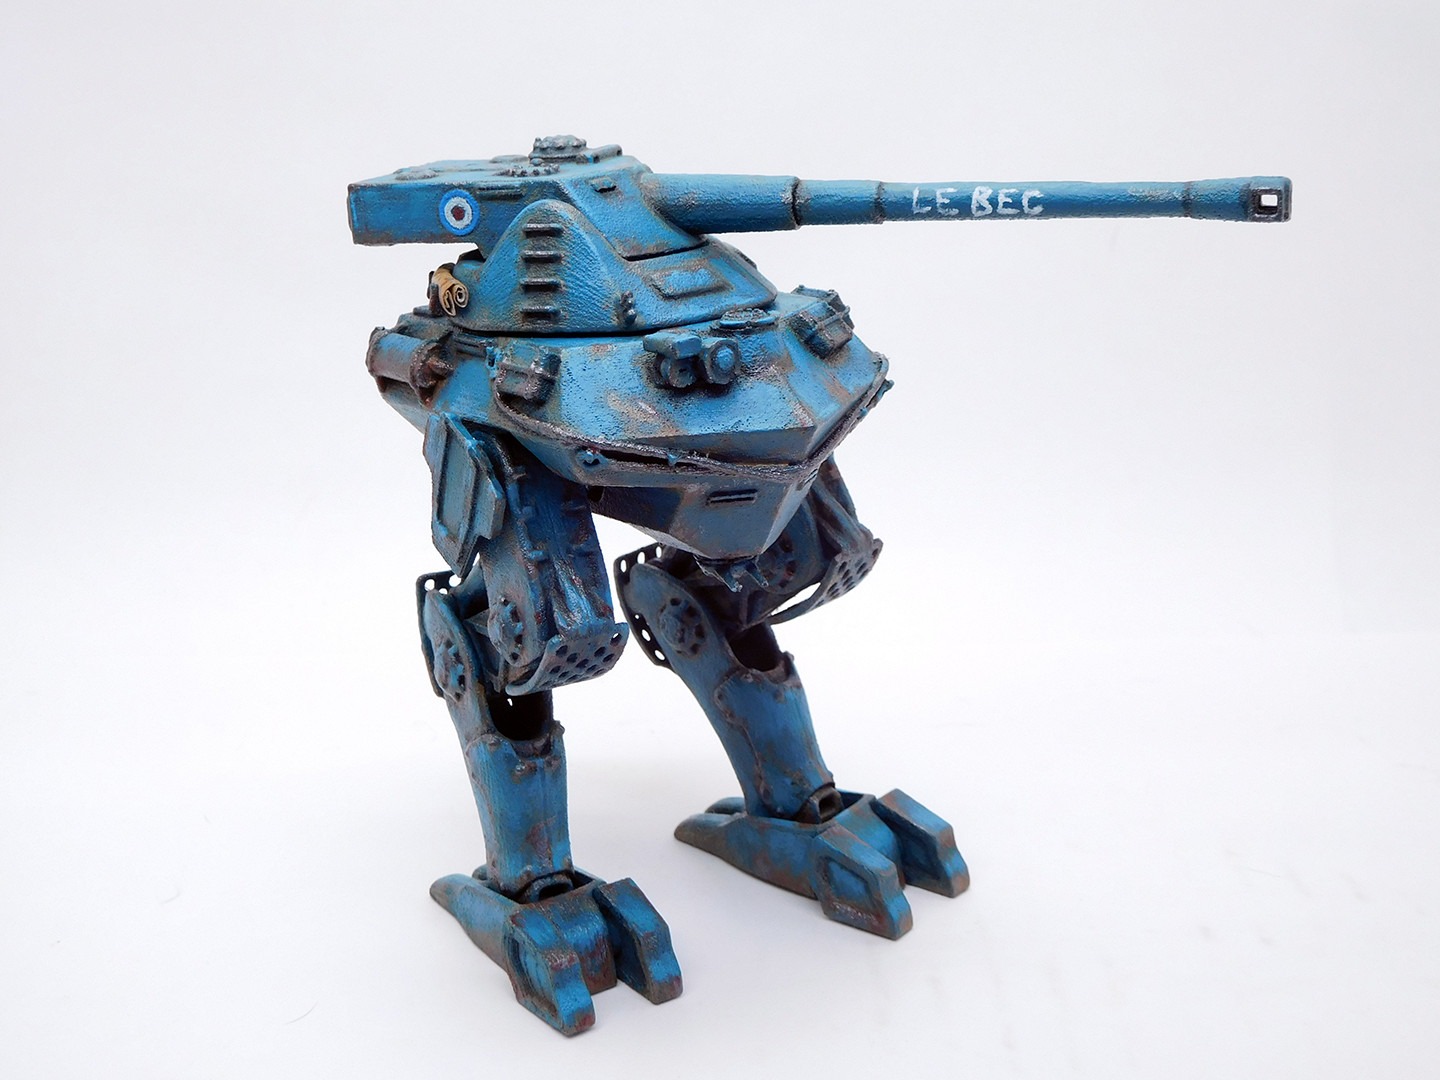 3D Printed Dieselpunk Models Merge Science Fiction And WWII 